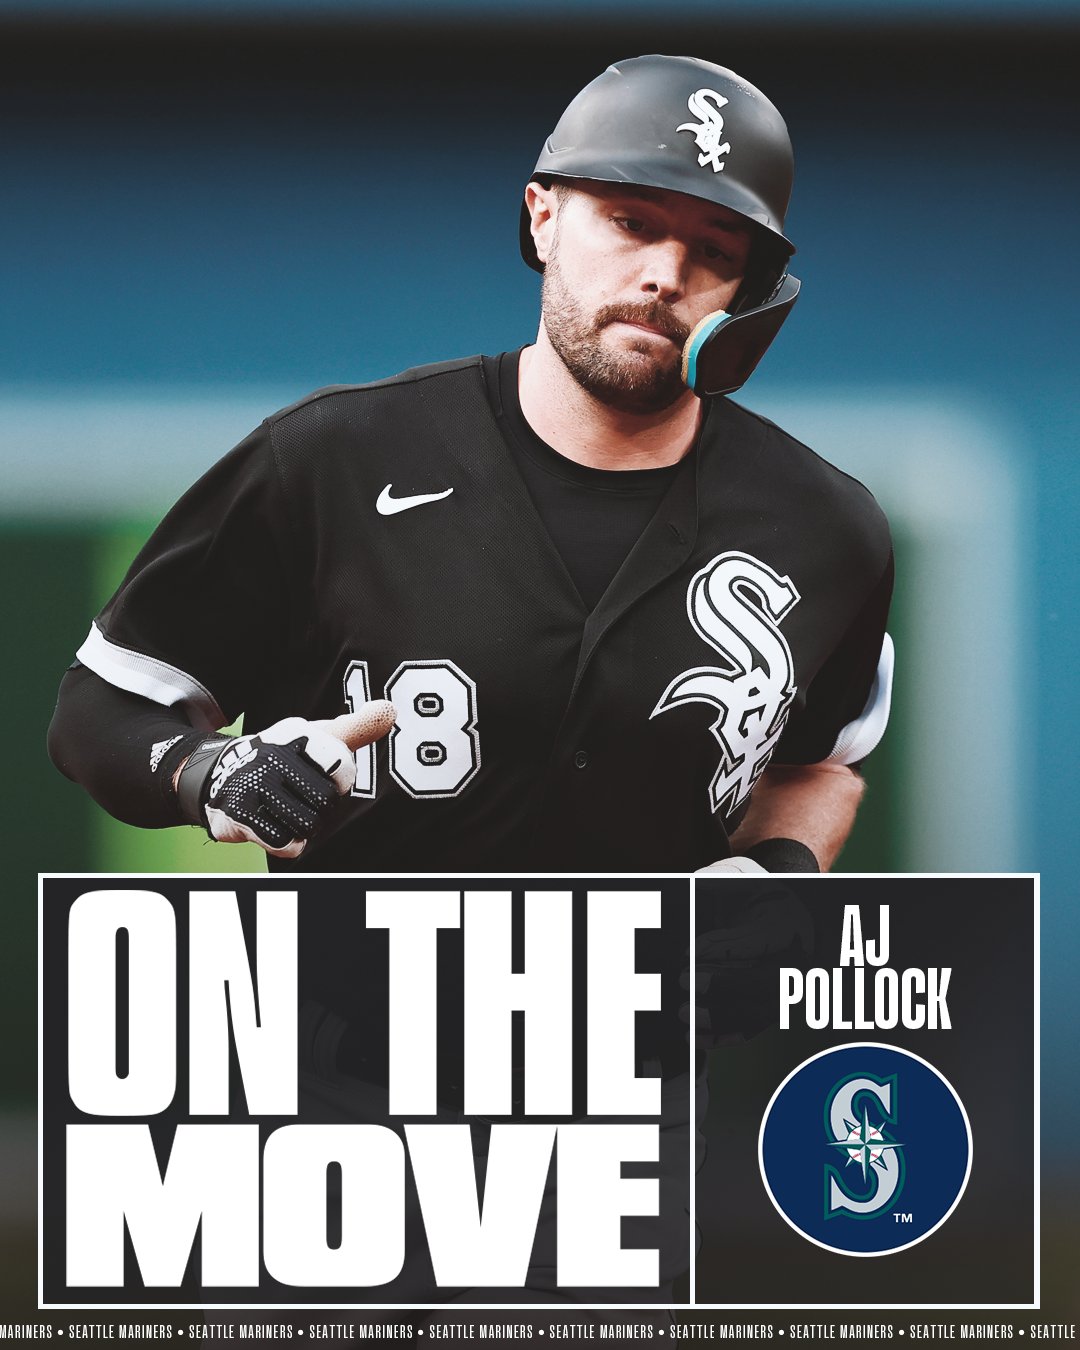 MLB on X: AJ Pollock is reportedly headed to the Mariners on a 1